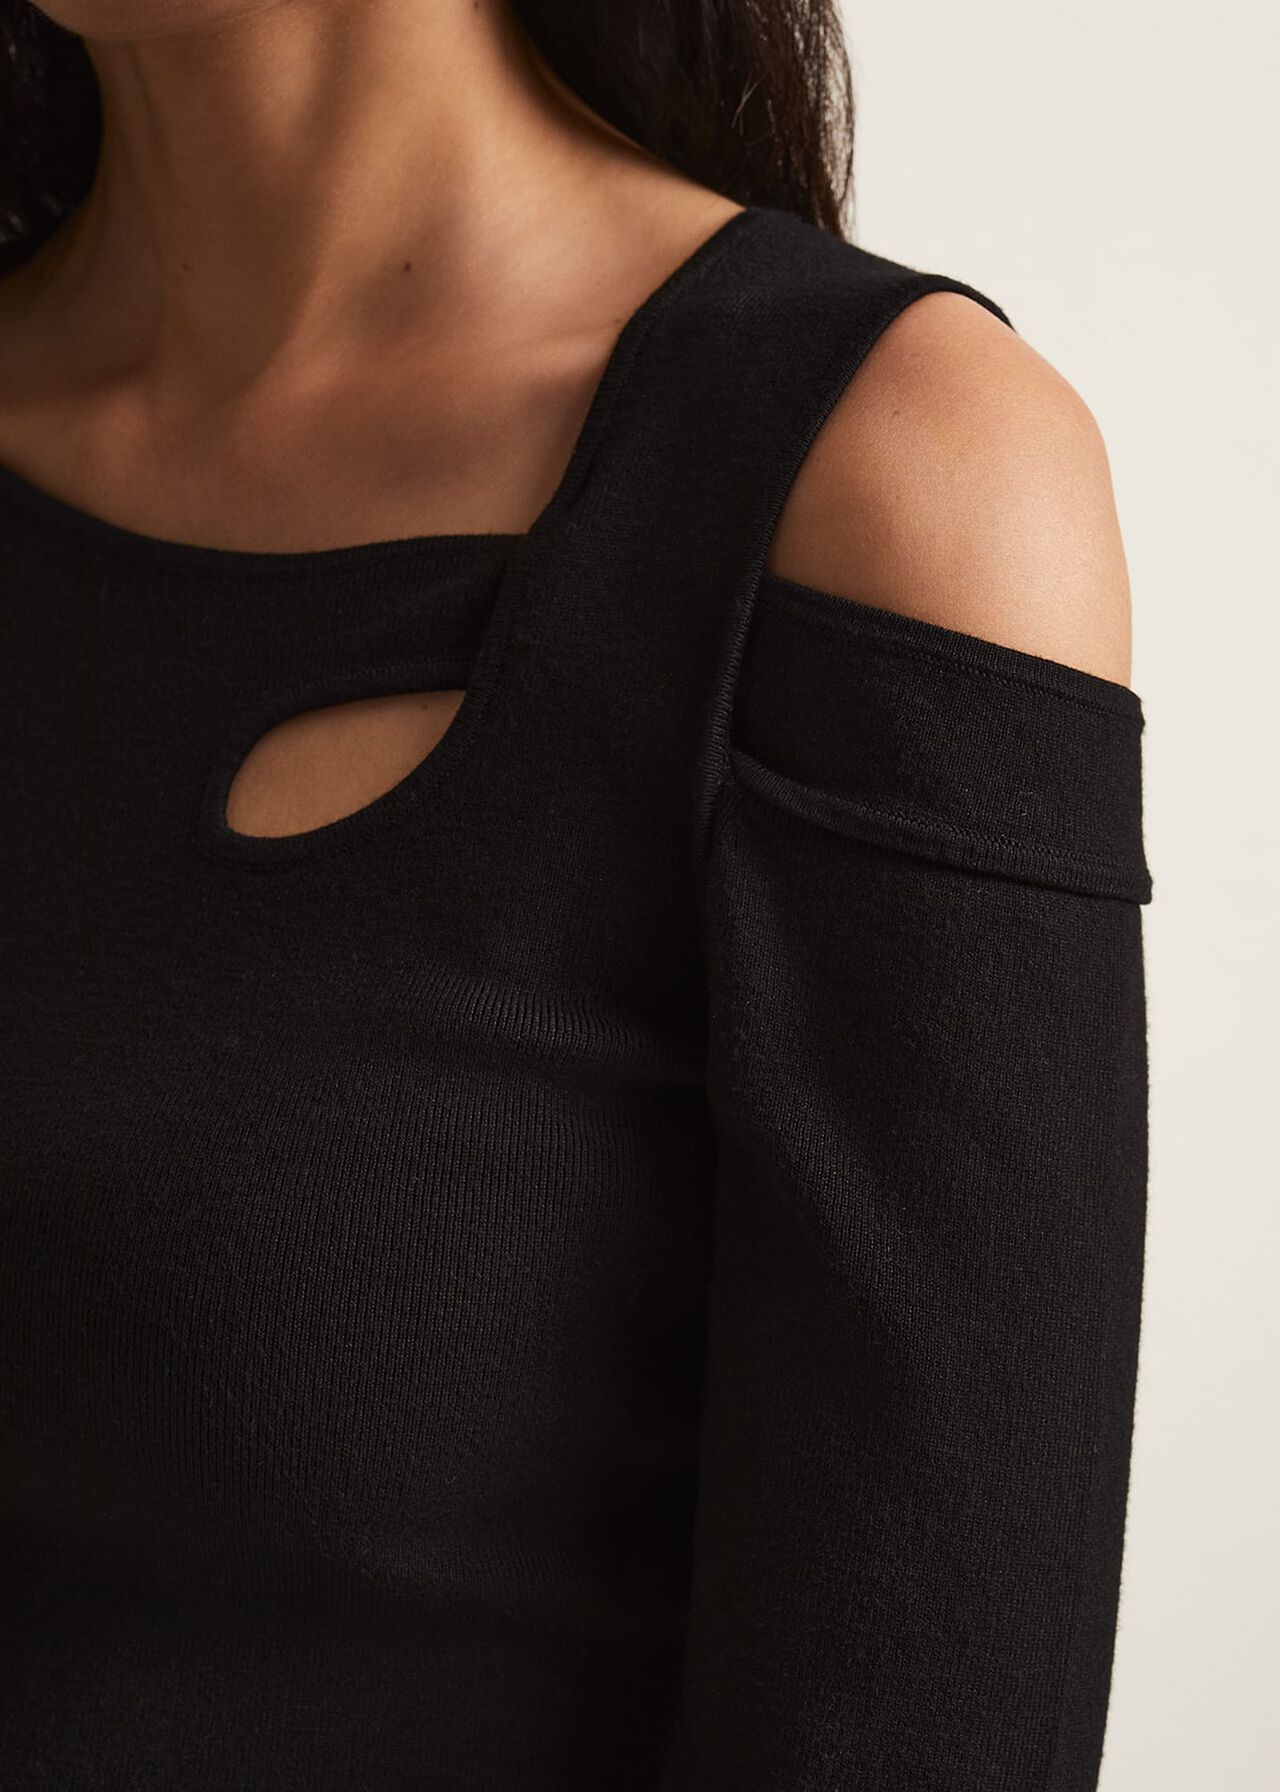 Wren Black Cut Out Knitted Top